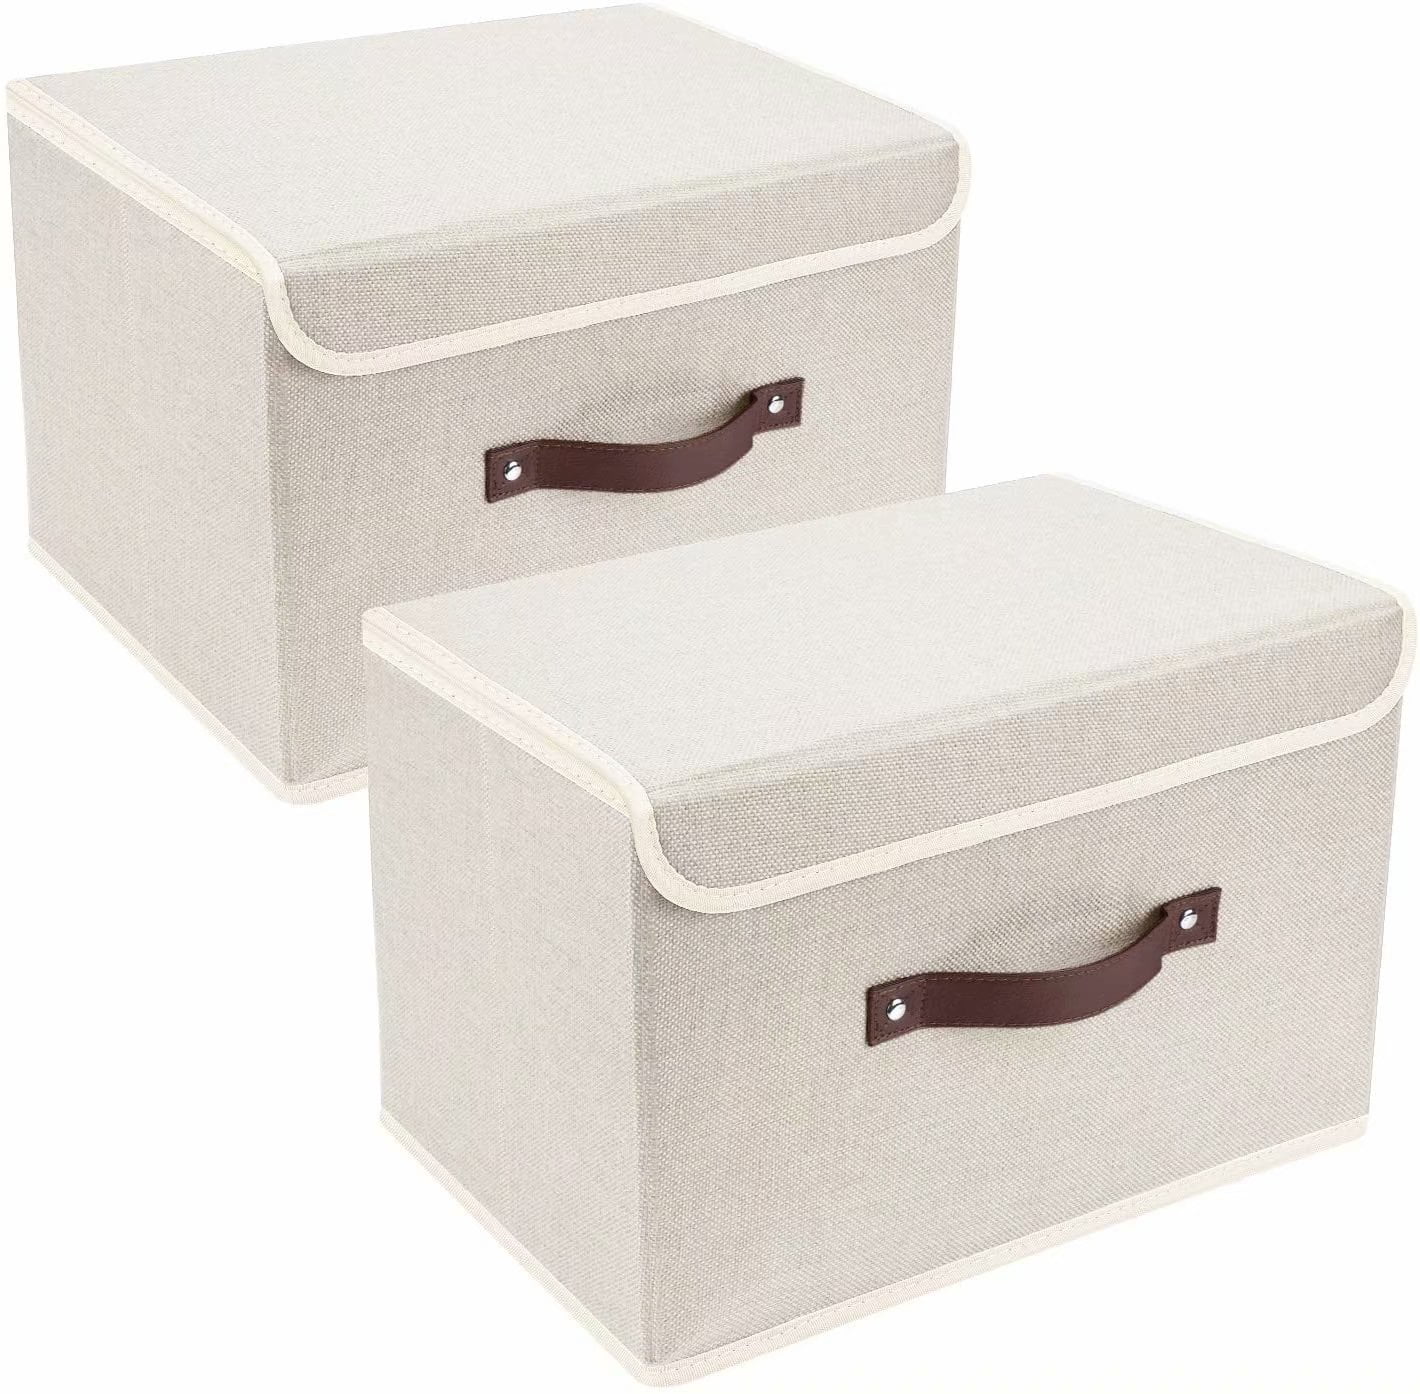 Bedroom Closet Shlves Brown Large Storage Boxes with Lids Fabric 3pcs Pack Foldable Cardboard Cube Organiser Box Baskets with Stackable Lid & Handles for Kids Toys Wardrobe Clothes